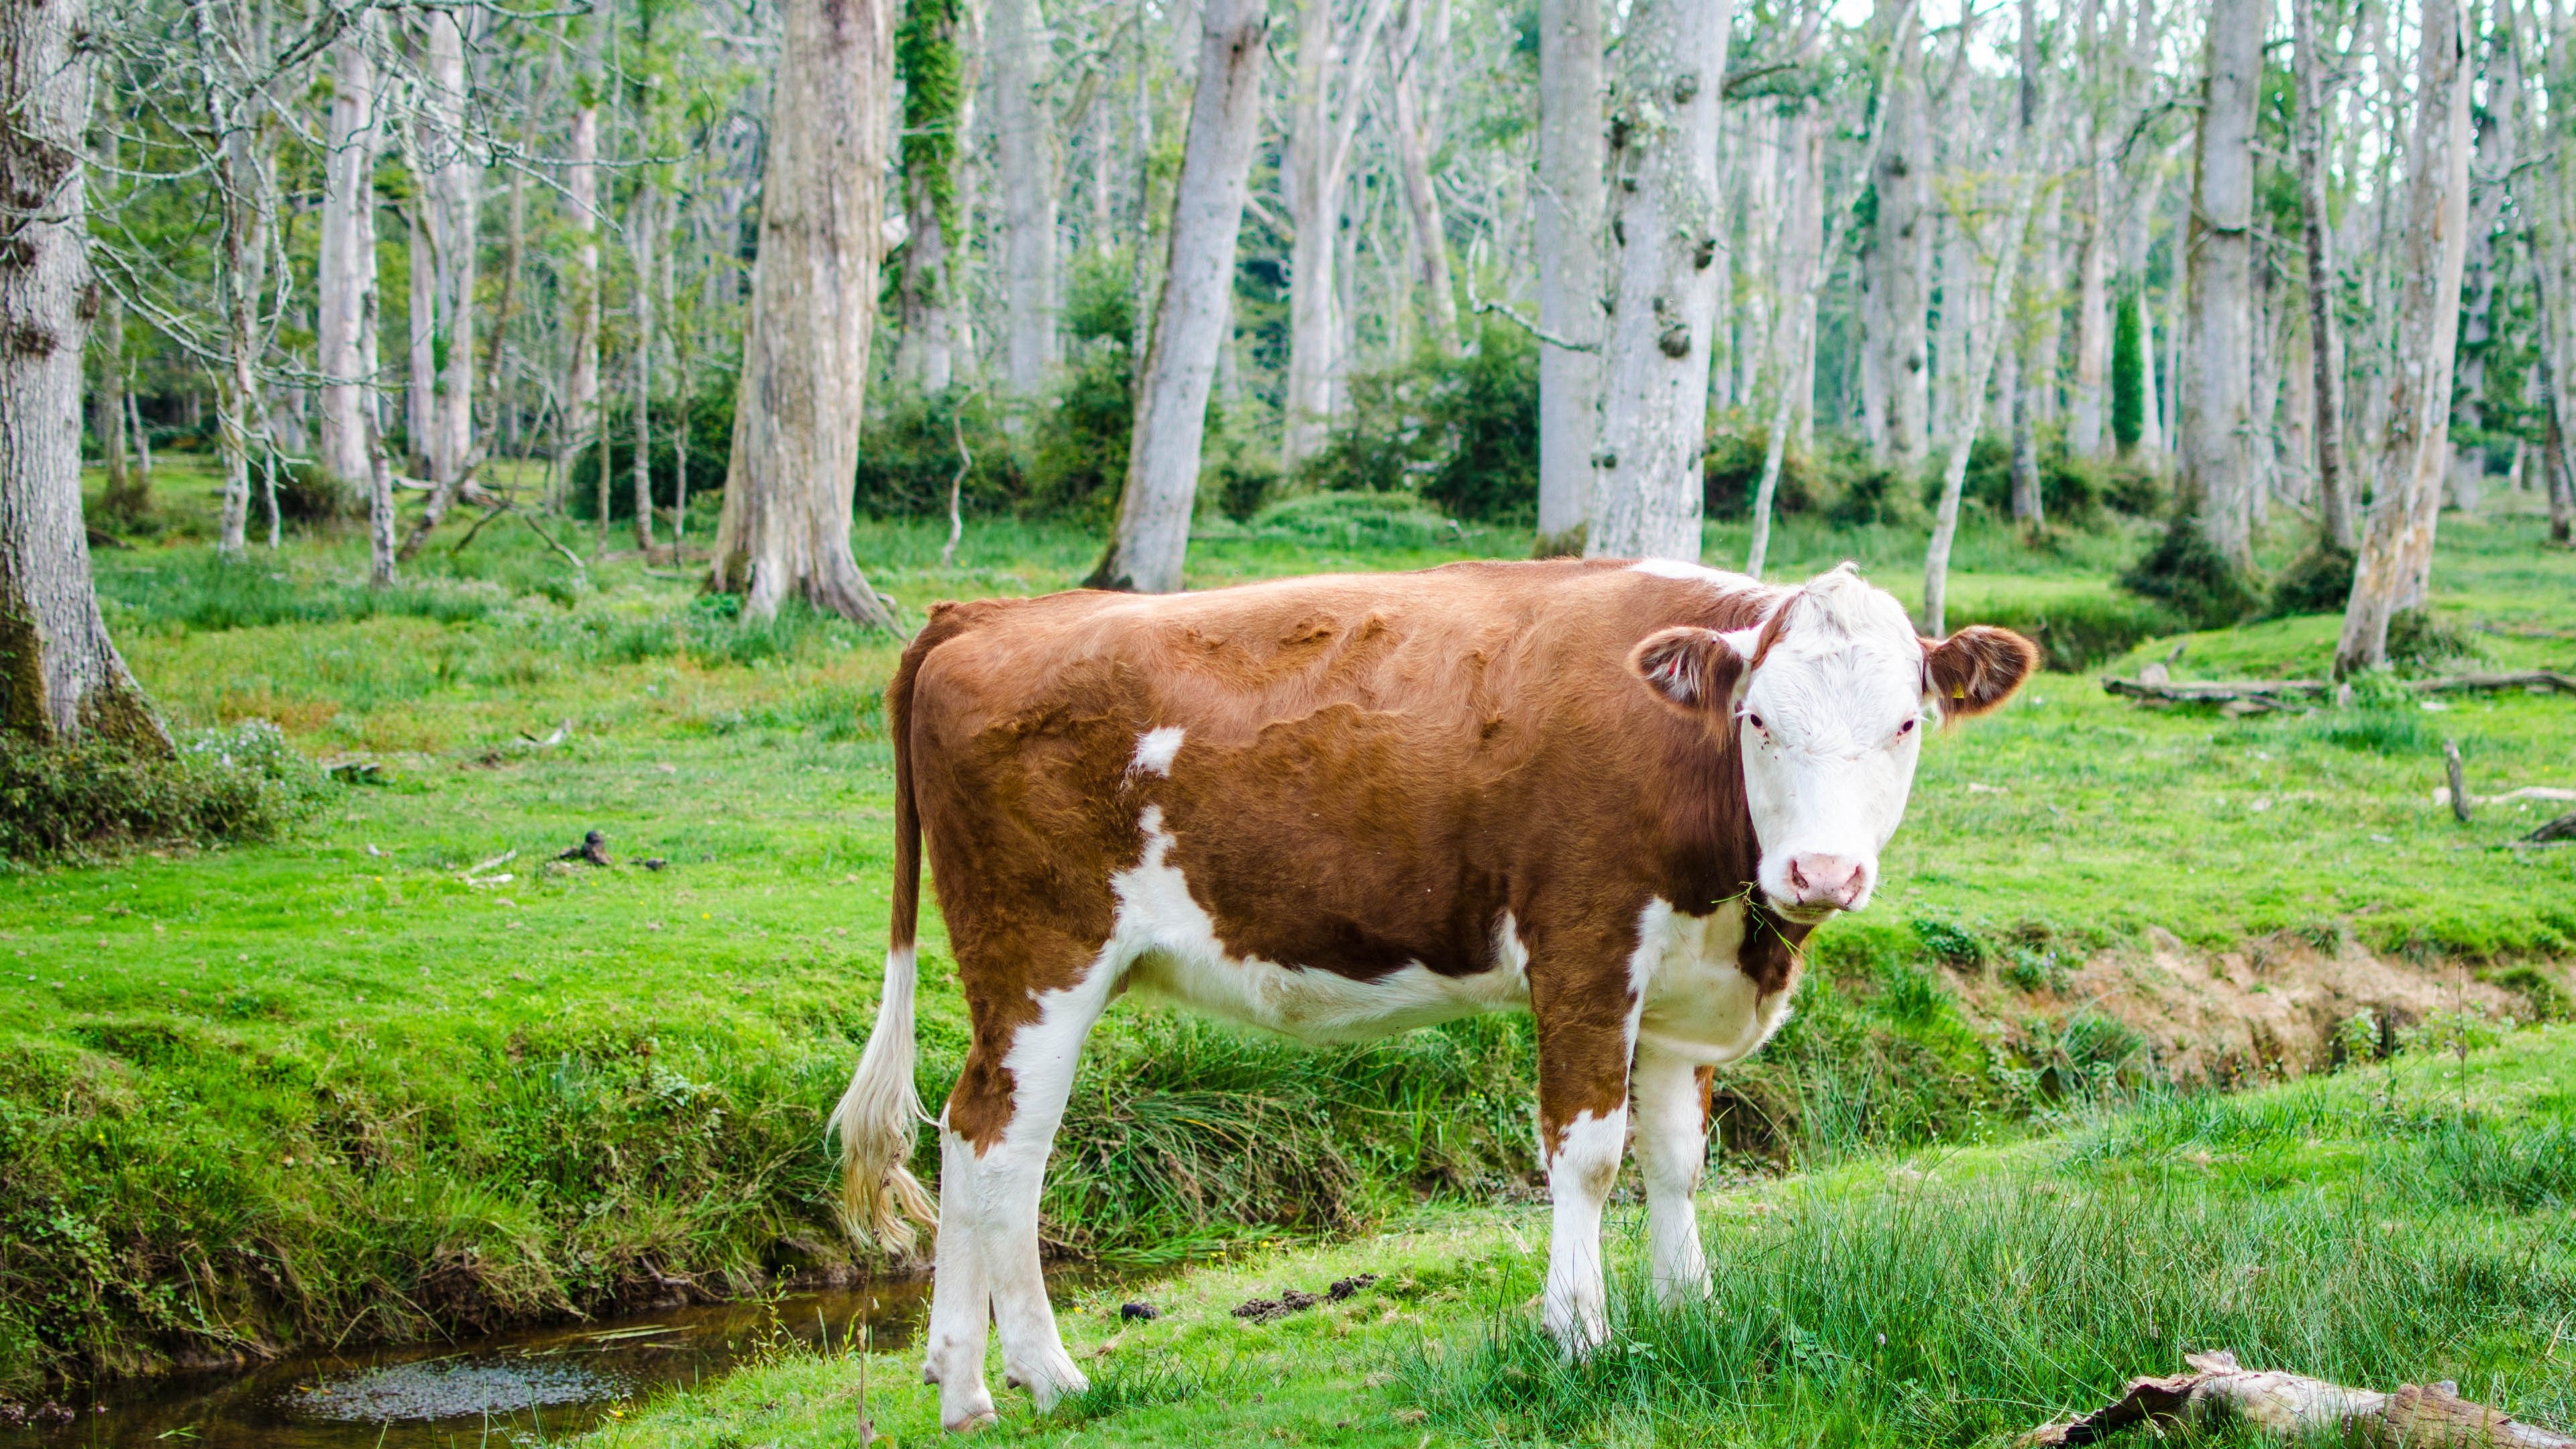 Cow 4k Wallpaper - Cow In The Forest - HD Wallpaper 